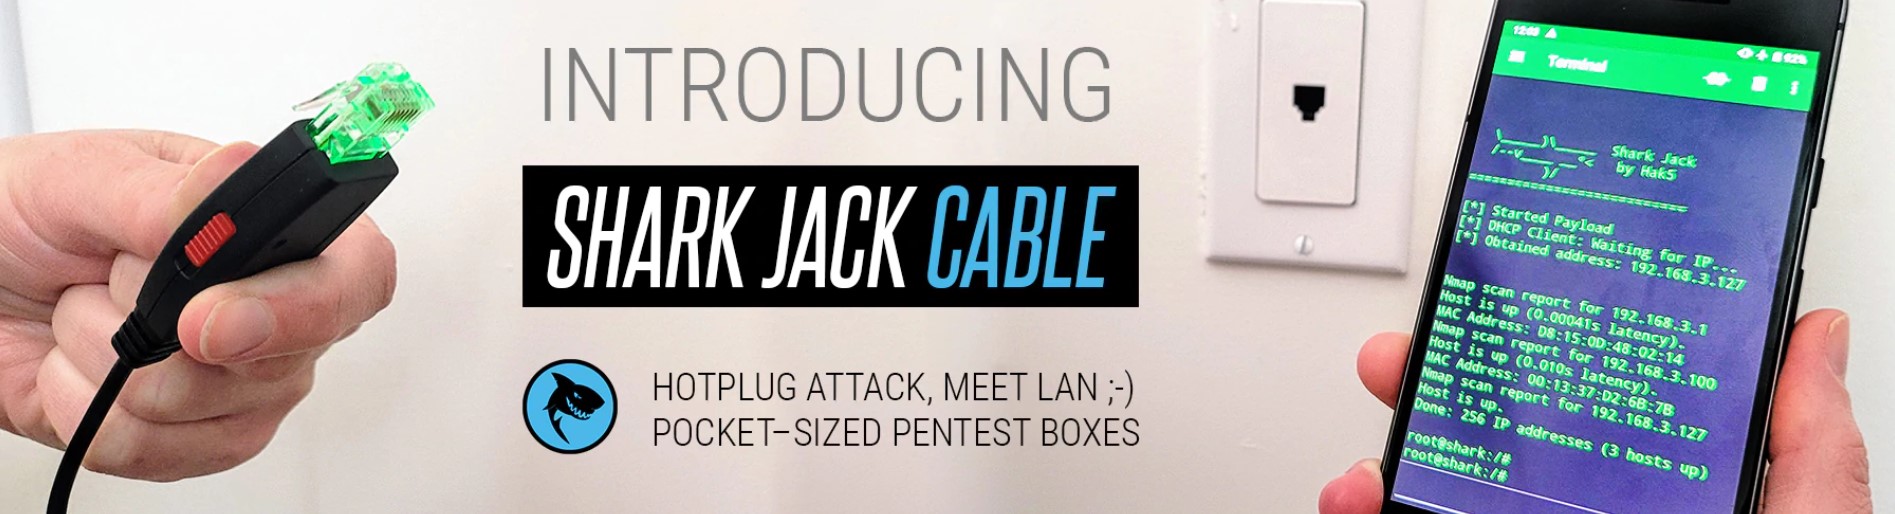 shark jack cable edition